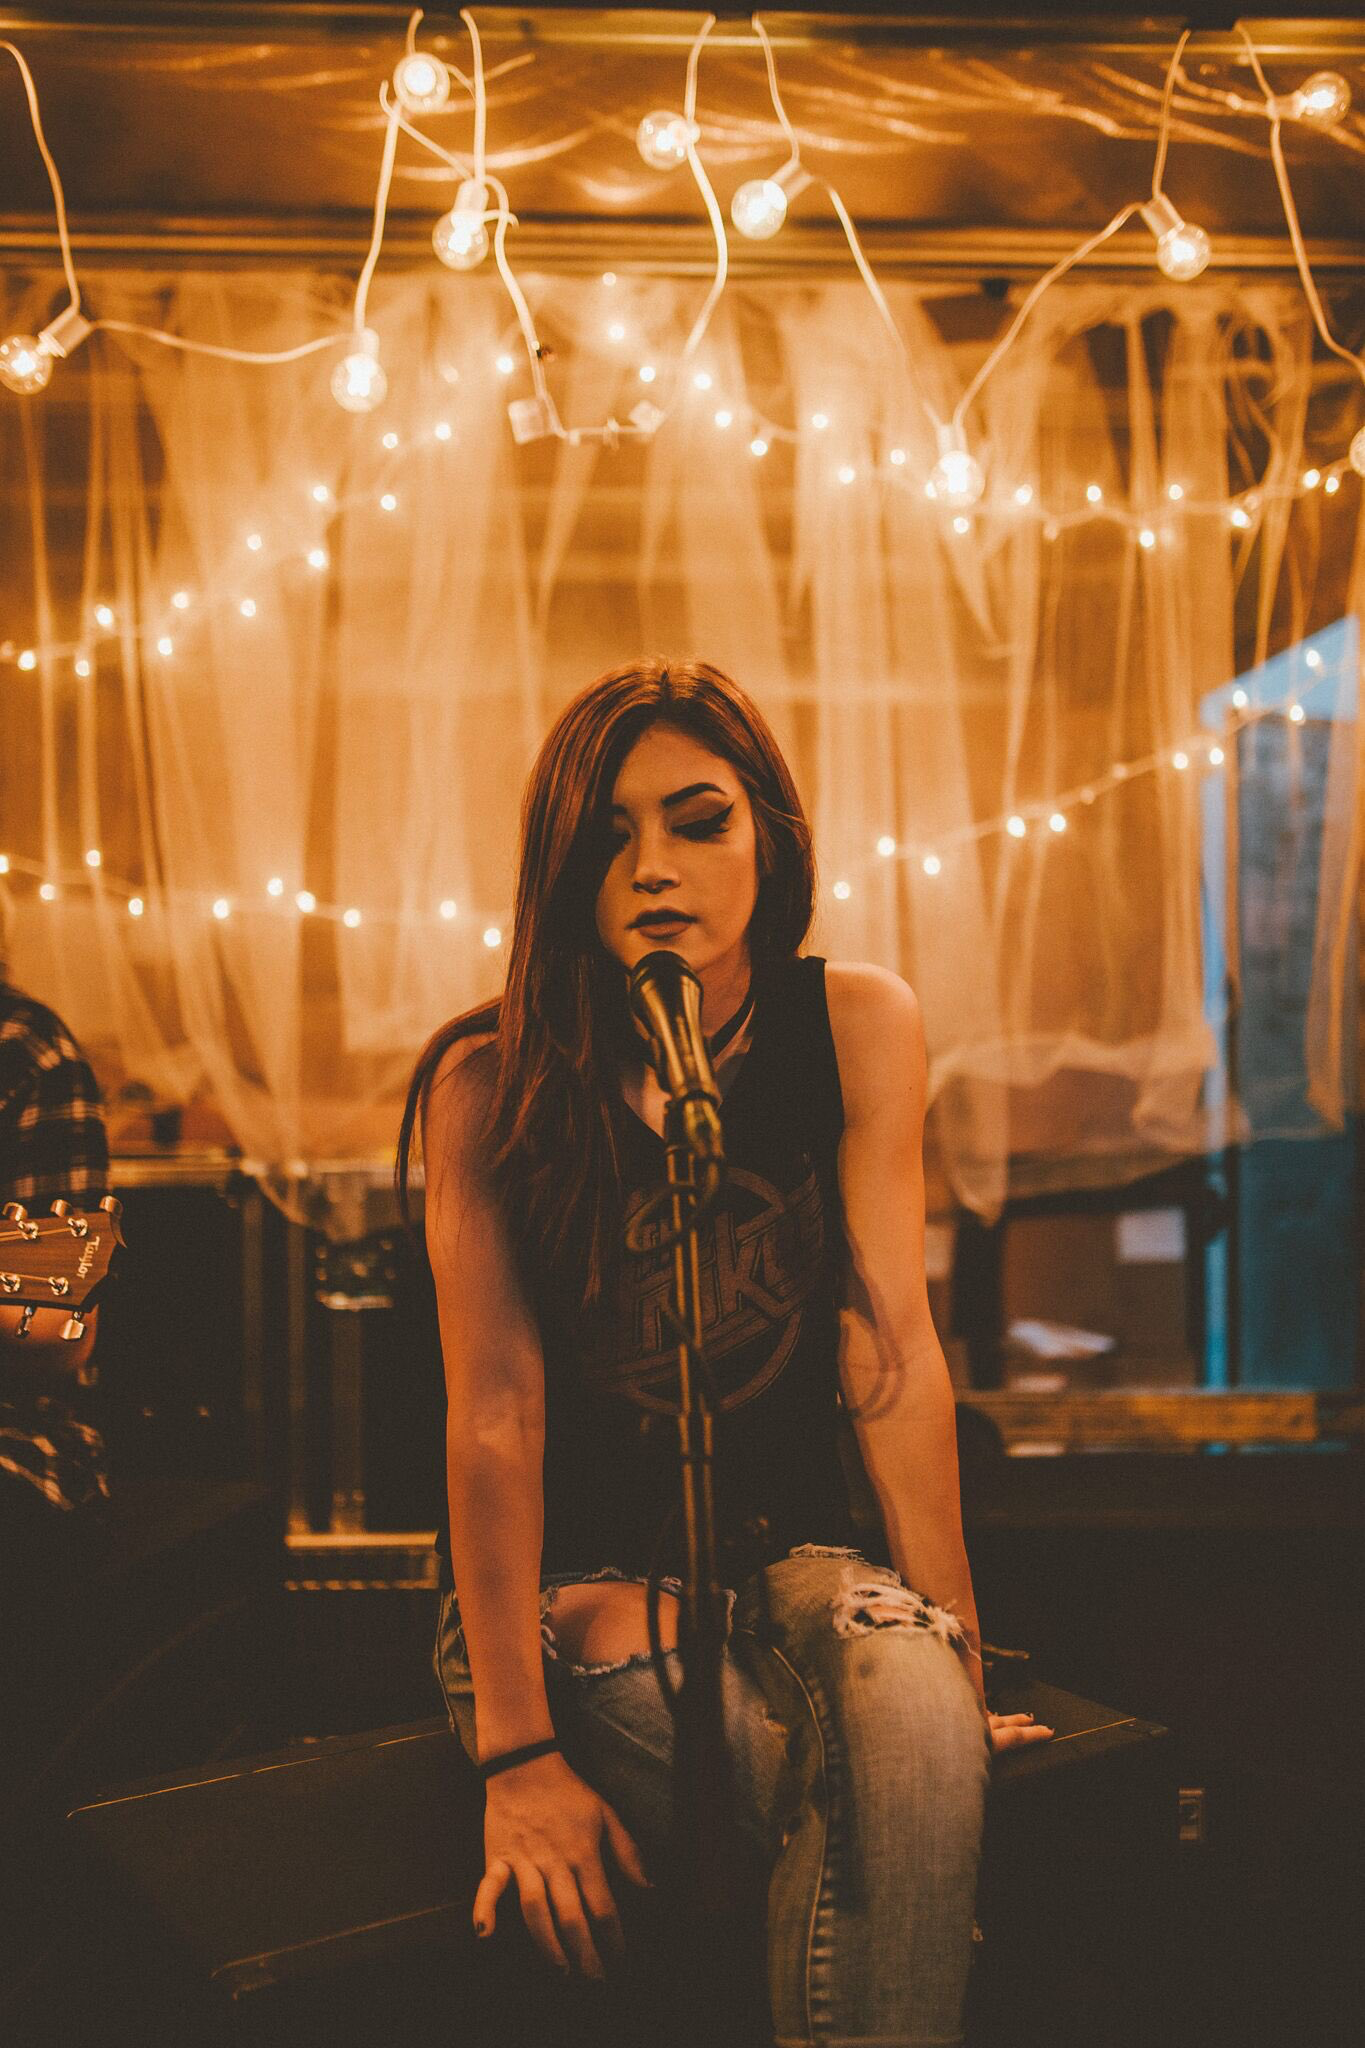 97 Against The Current Wallpapers On Wallpapersafari